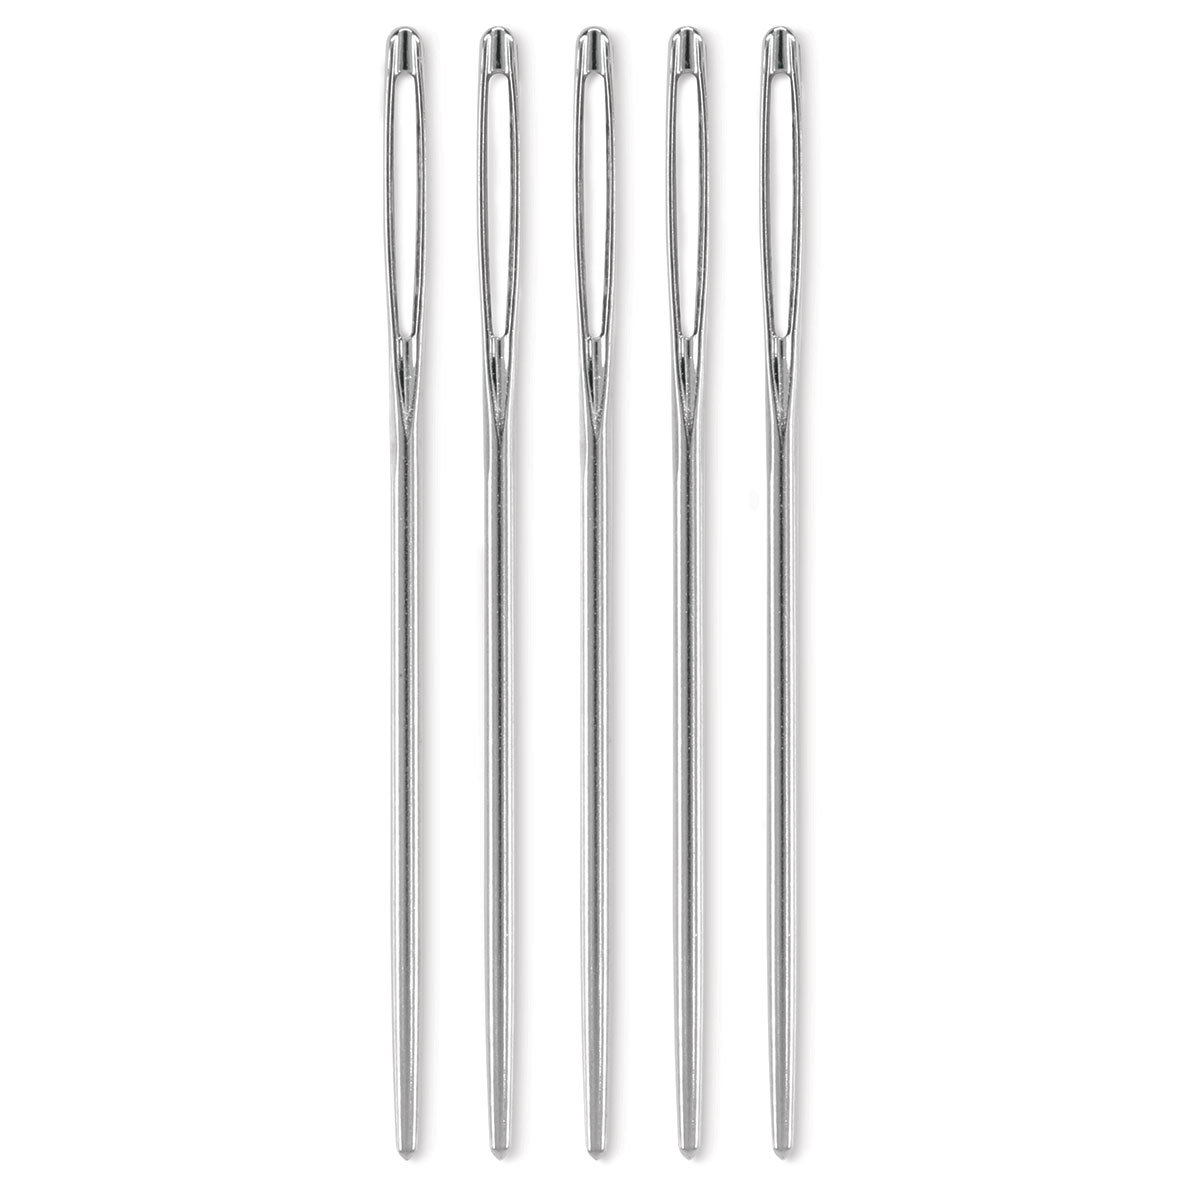 Tapestry/Cross Stitch Needles - Pack of 6 Sizes 18/22